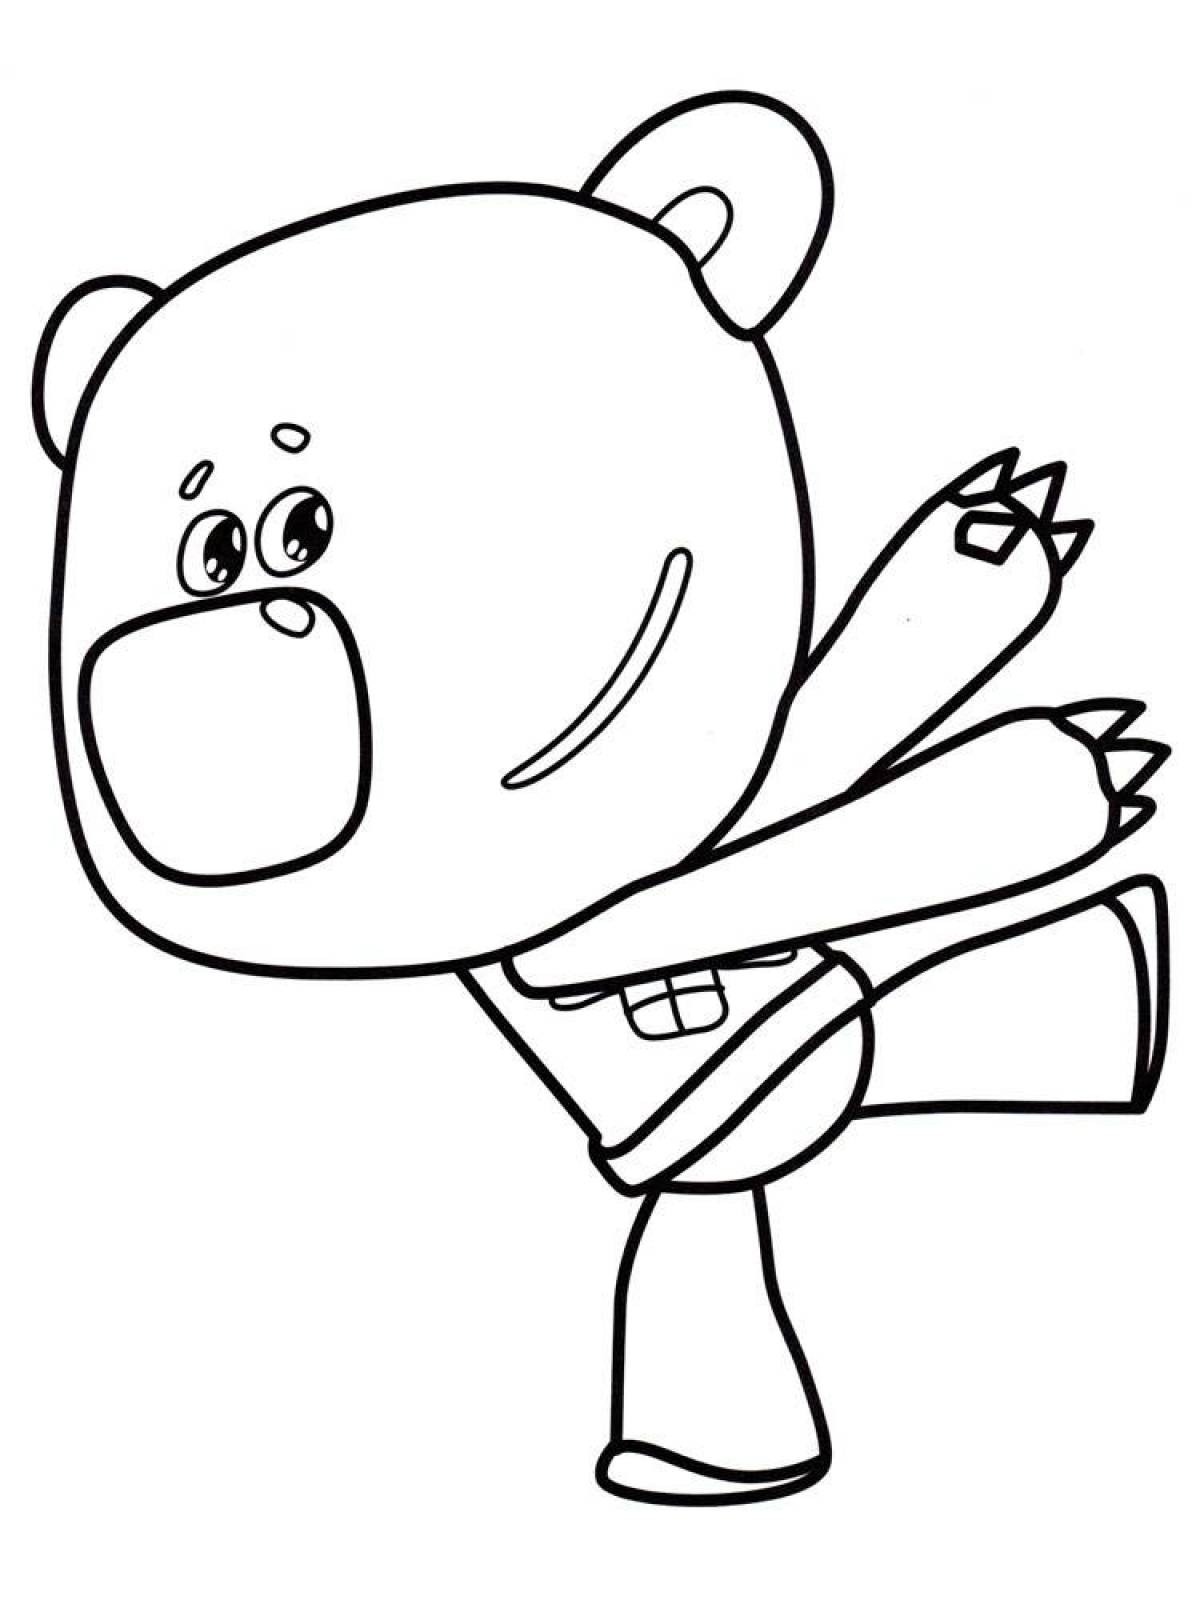 Turn on the cute bear coloring #7